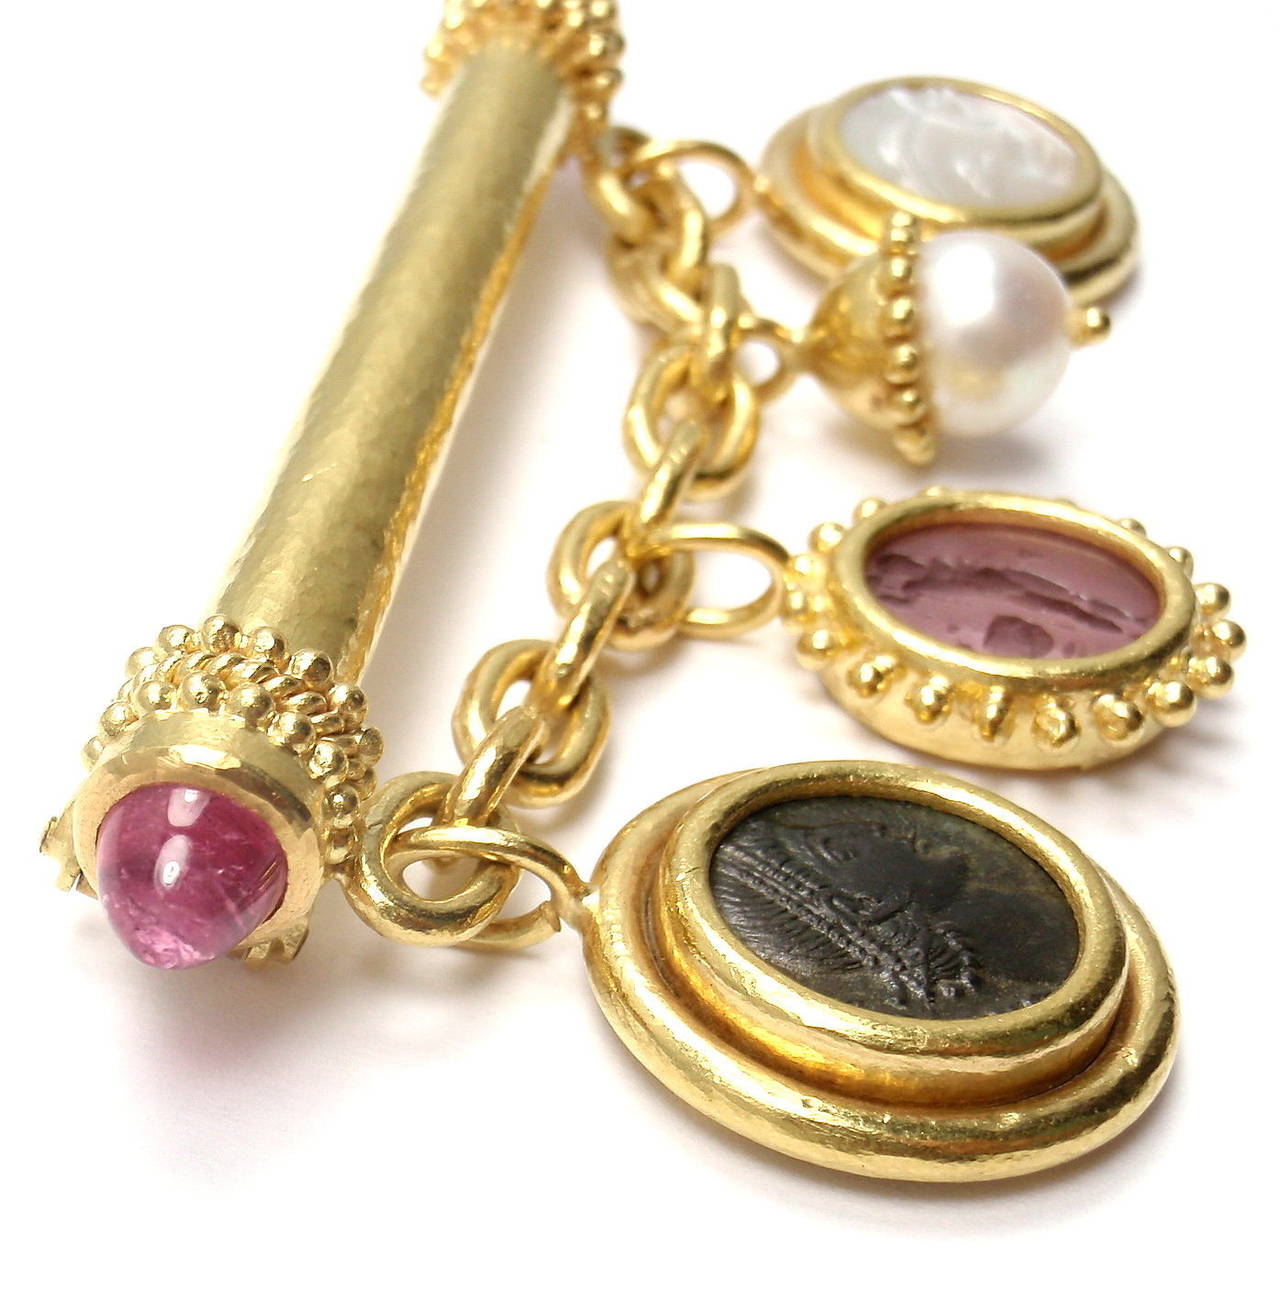 18k Yellow Gold Intaglio Tourmaline Charm Brooch Pin by Elizabeth Locke. 
With 32 TRIANGULAR SHAPED ENDS MADE OF PINK TOURMALINE 5MM EACH 
1 X PINK MOTHER OF PEARL WITH GLASS OVERLAY THAT IS 10MM
1 X PEARL, 8MM
1 X MOTHER OF PEARL WITH GLASS